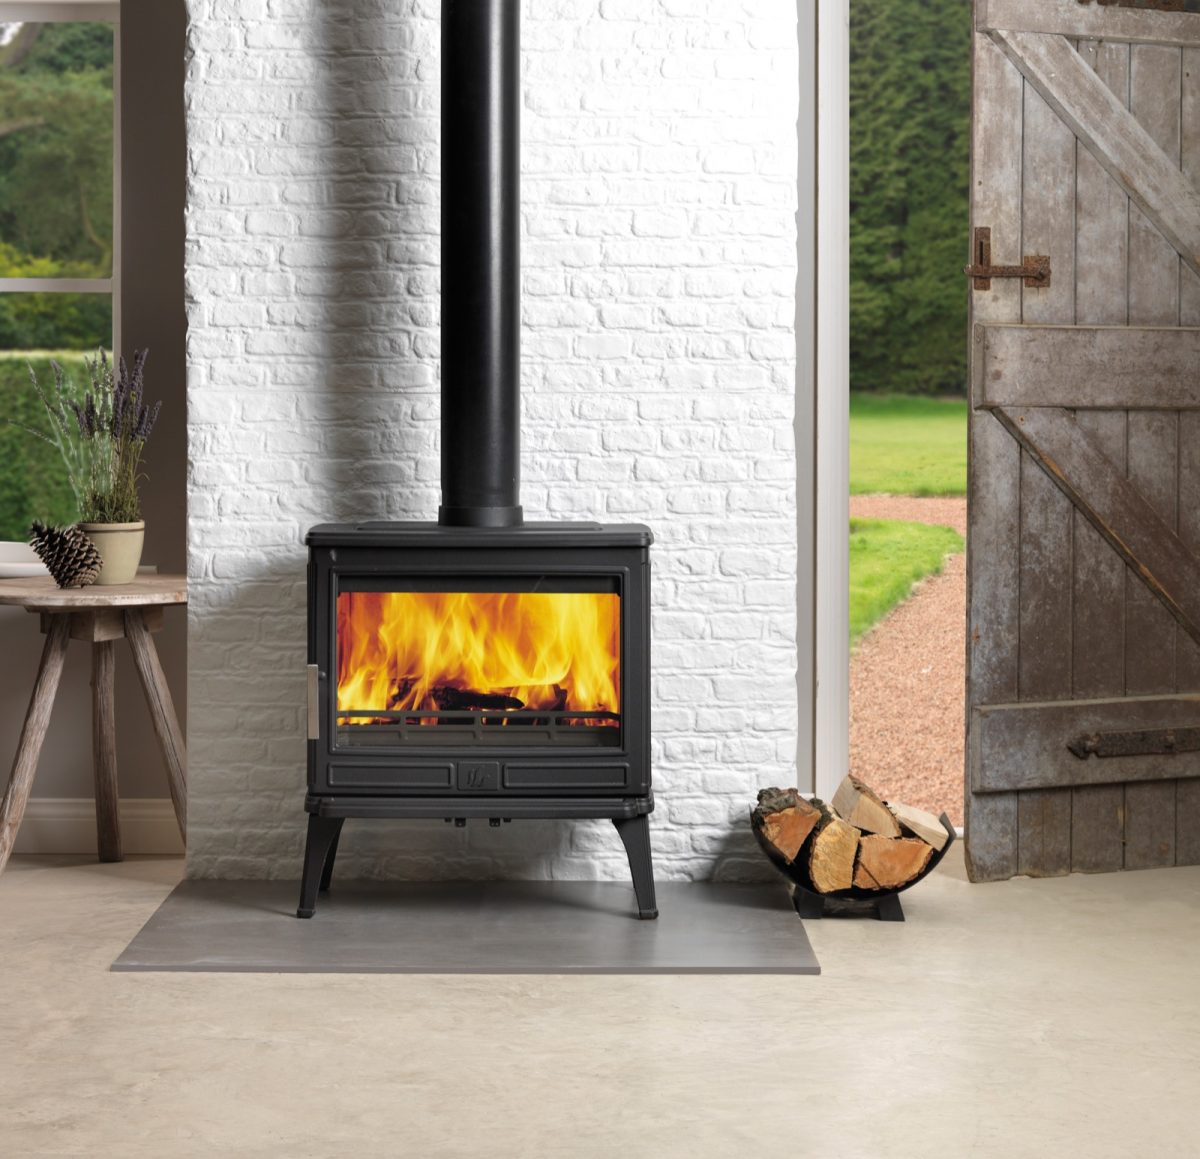 ACR Larchdale 9kw Smoke Exempt Stove